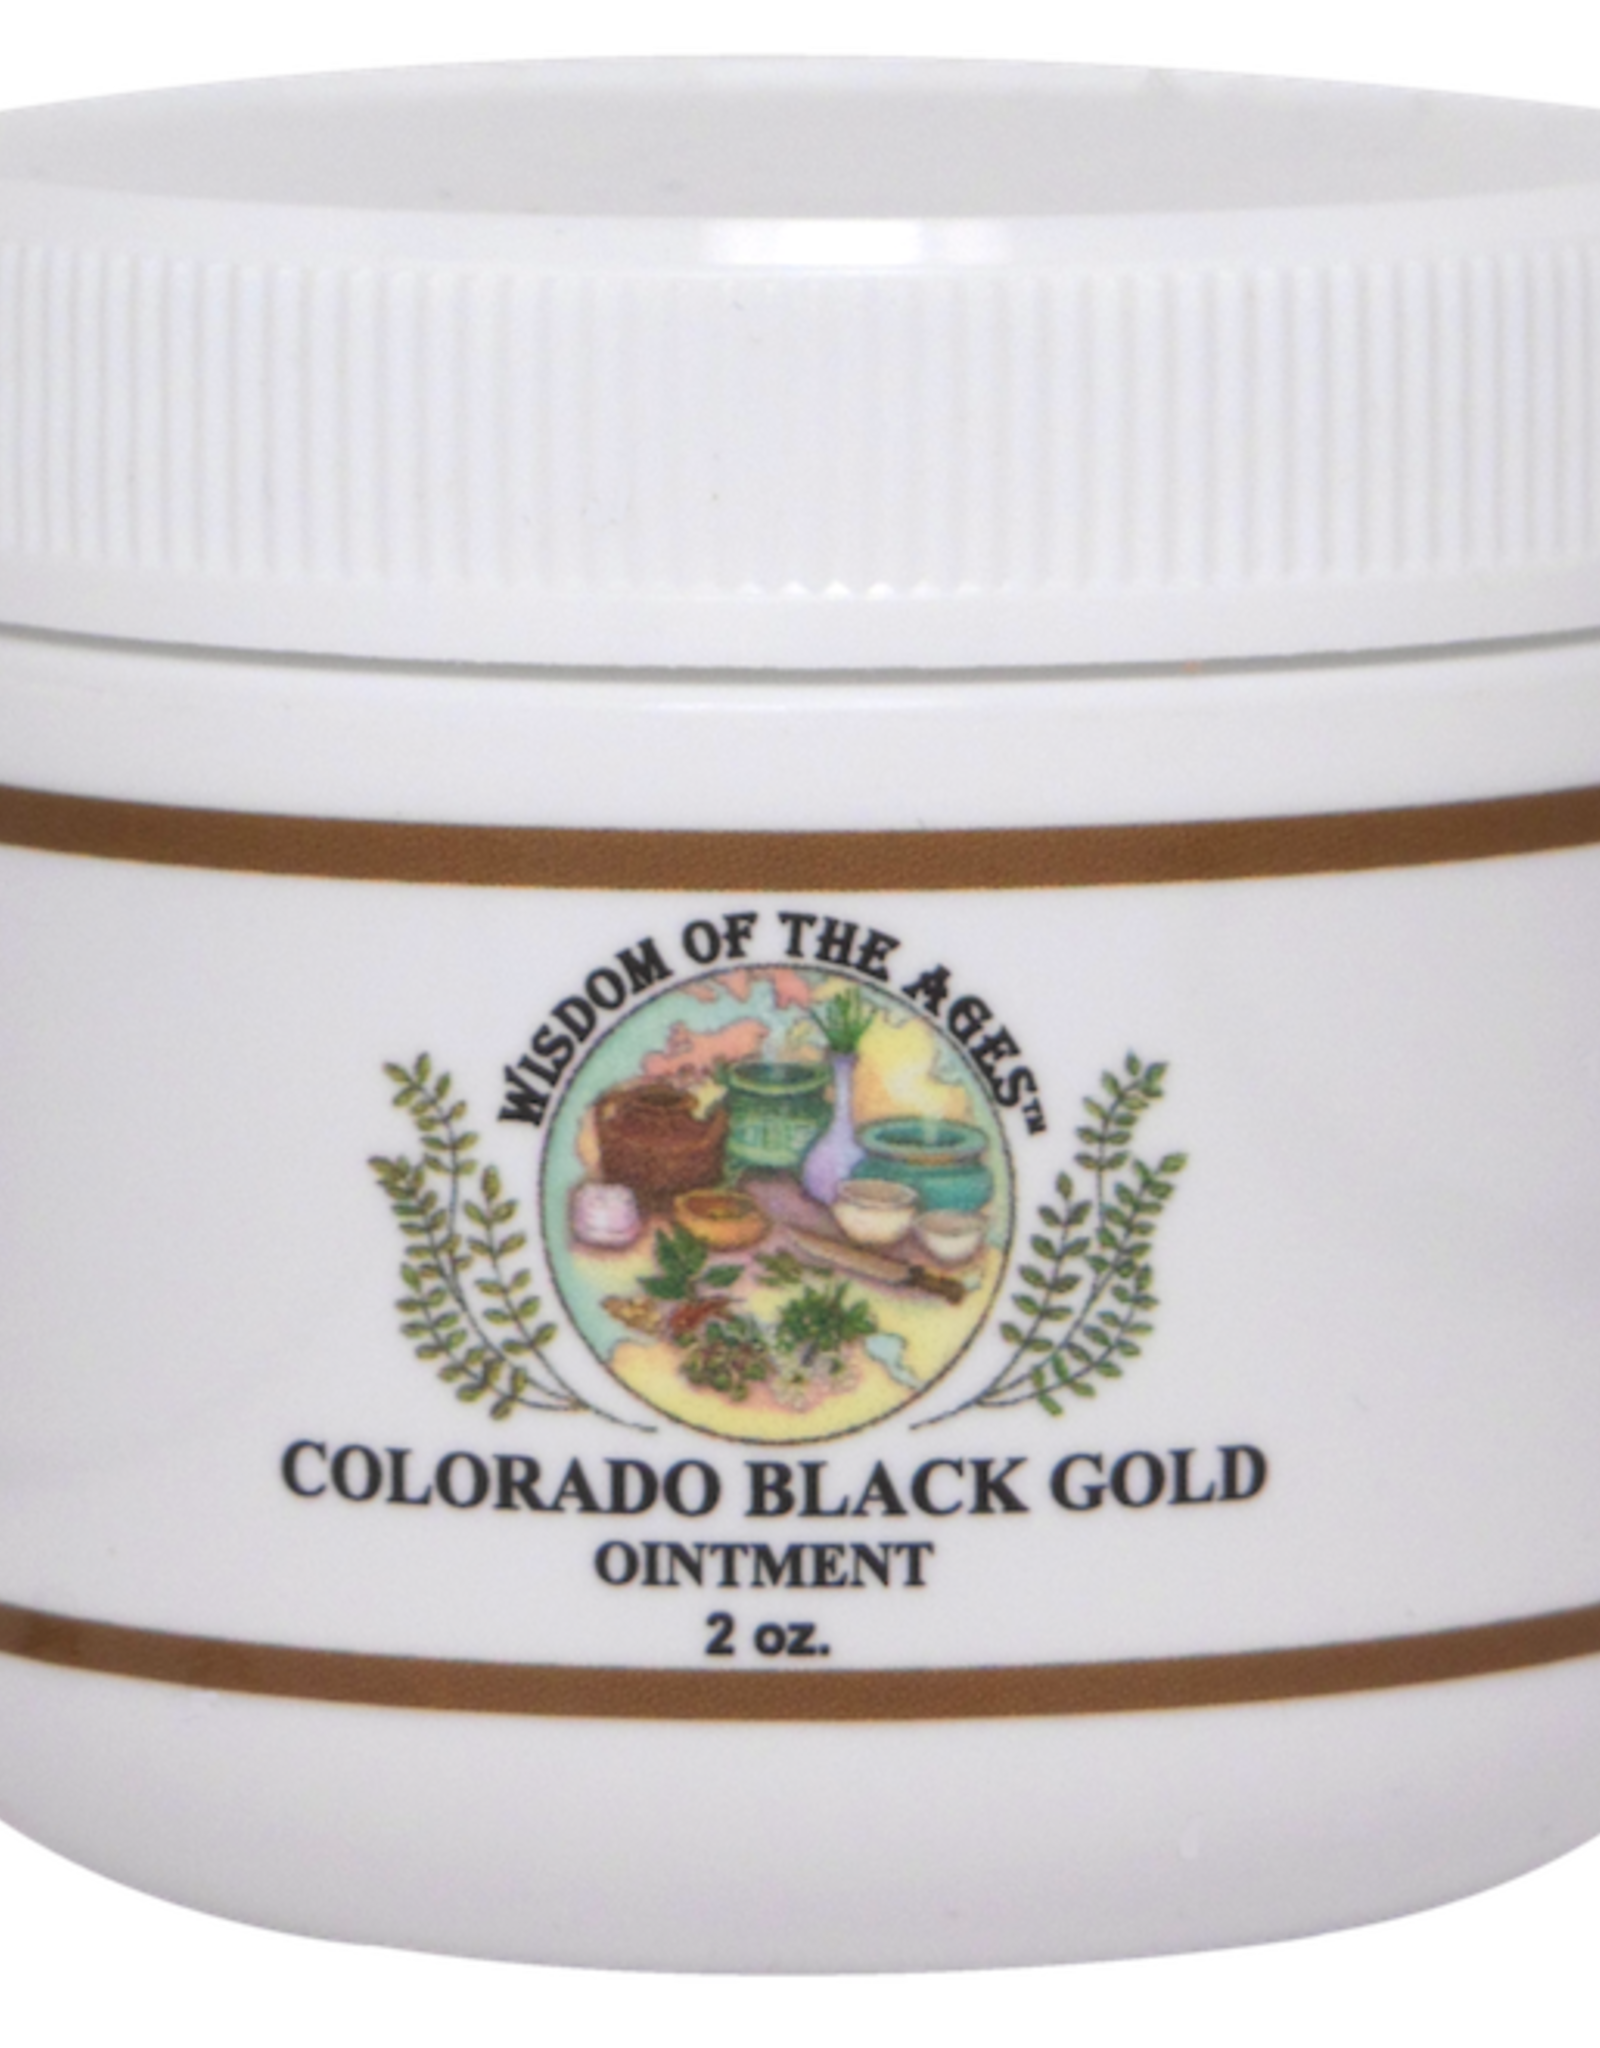 Wisdom of the Ages Colorado Black Gold Ointment